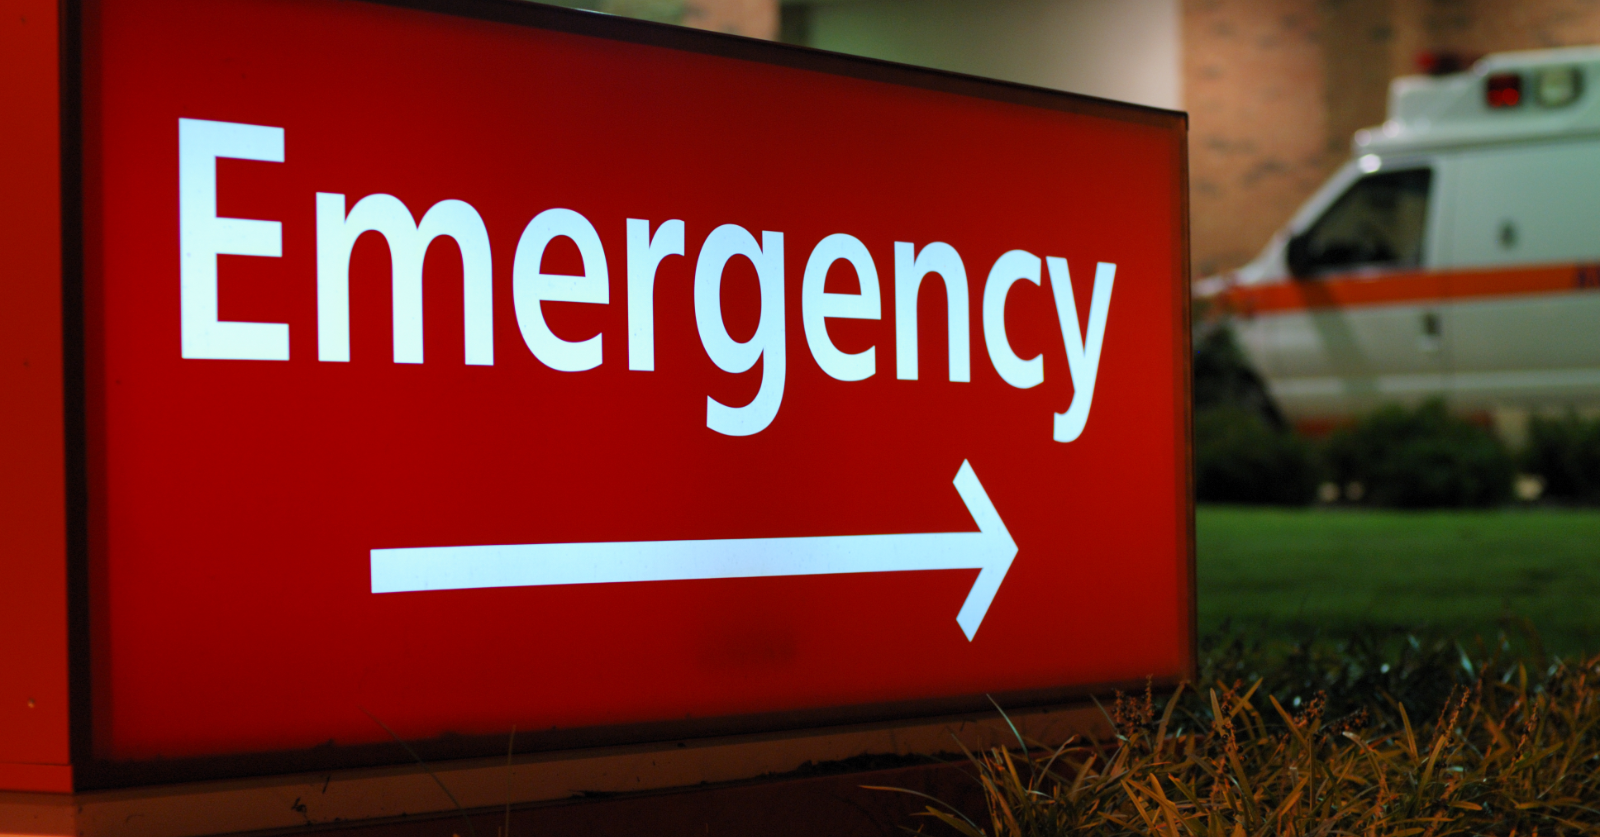 Research reveals buprenorphine in the ER could be game-changer in opioid epidemic